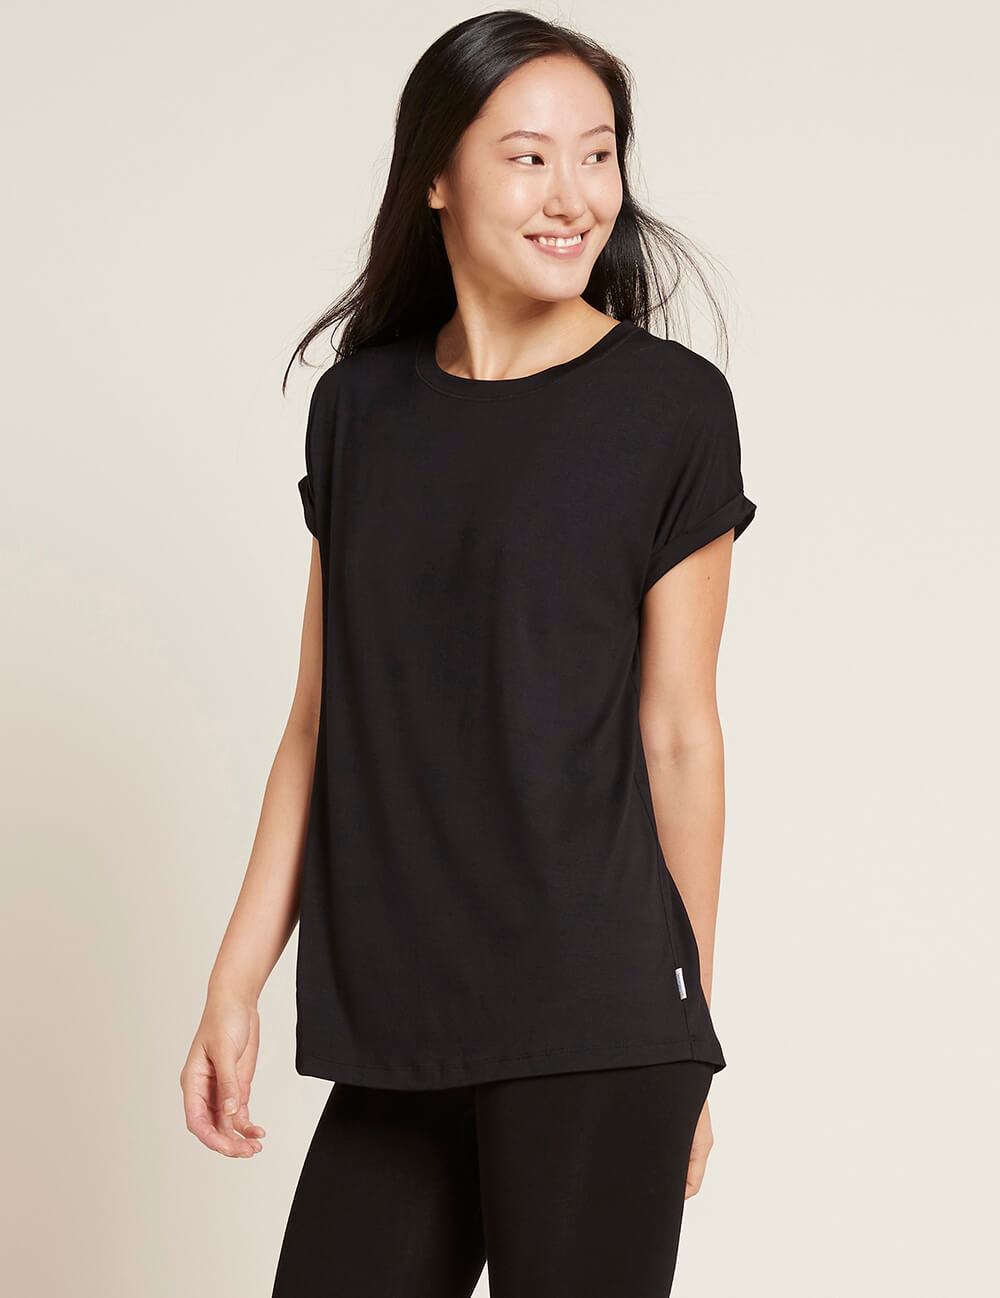 Downtime Lounge Top- Black